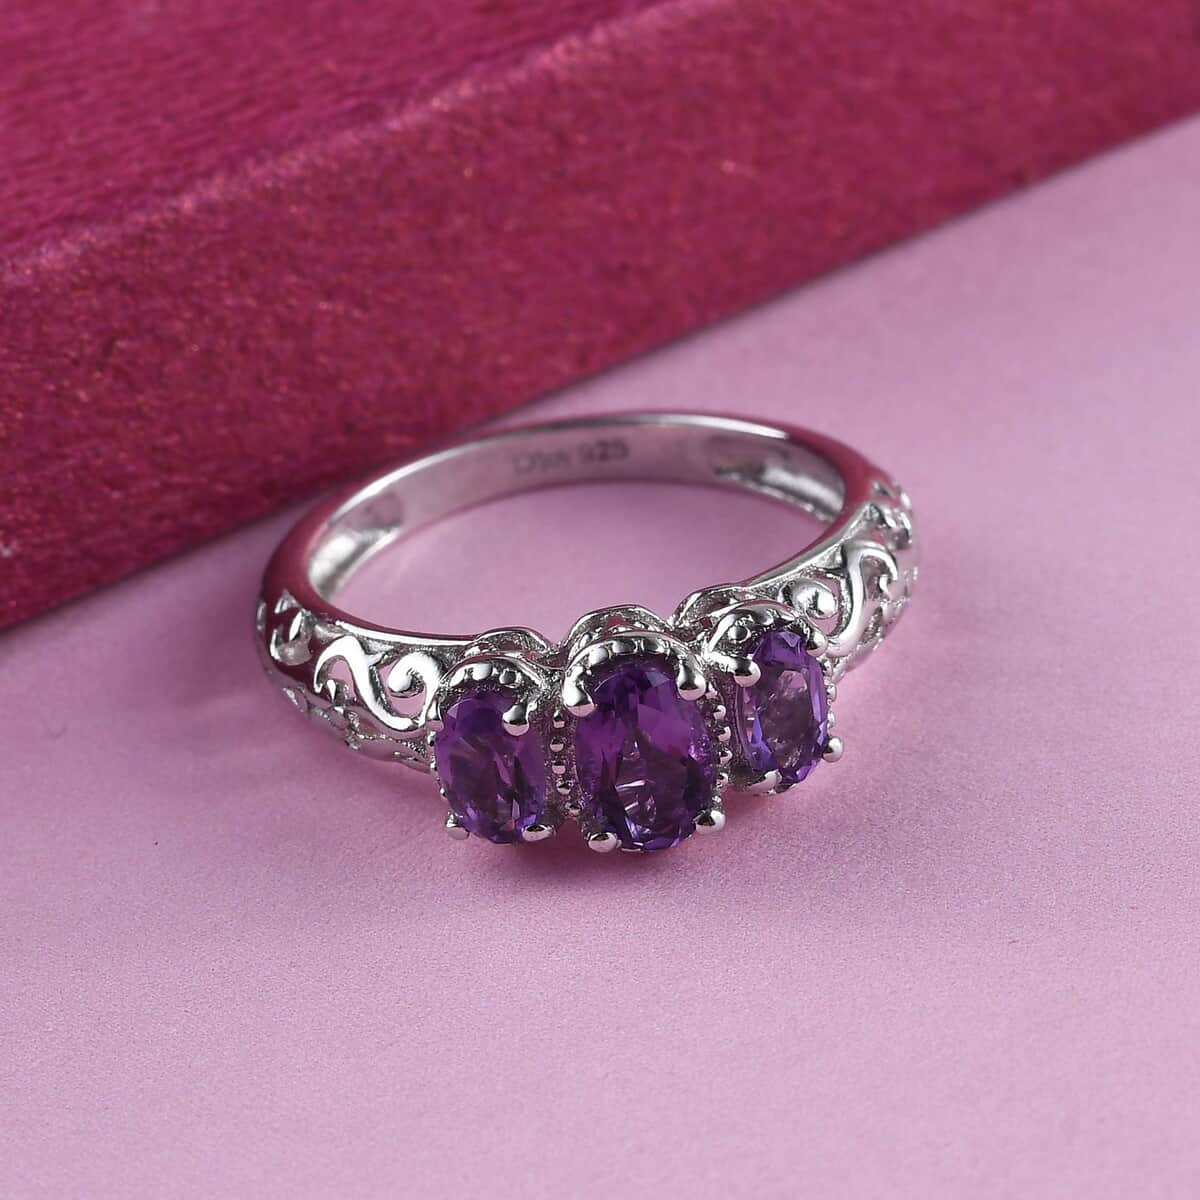 Amethyst Ring, 3 Stone Amethyst Ring, Trilogy Ring, Sterling Silver Ring, Birthstone Jewelry, Amethyst 3 Stone Ring 0.85 ctw (Size 10.0) image number 4